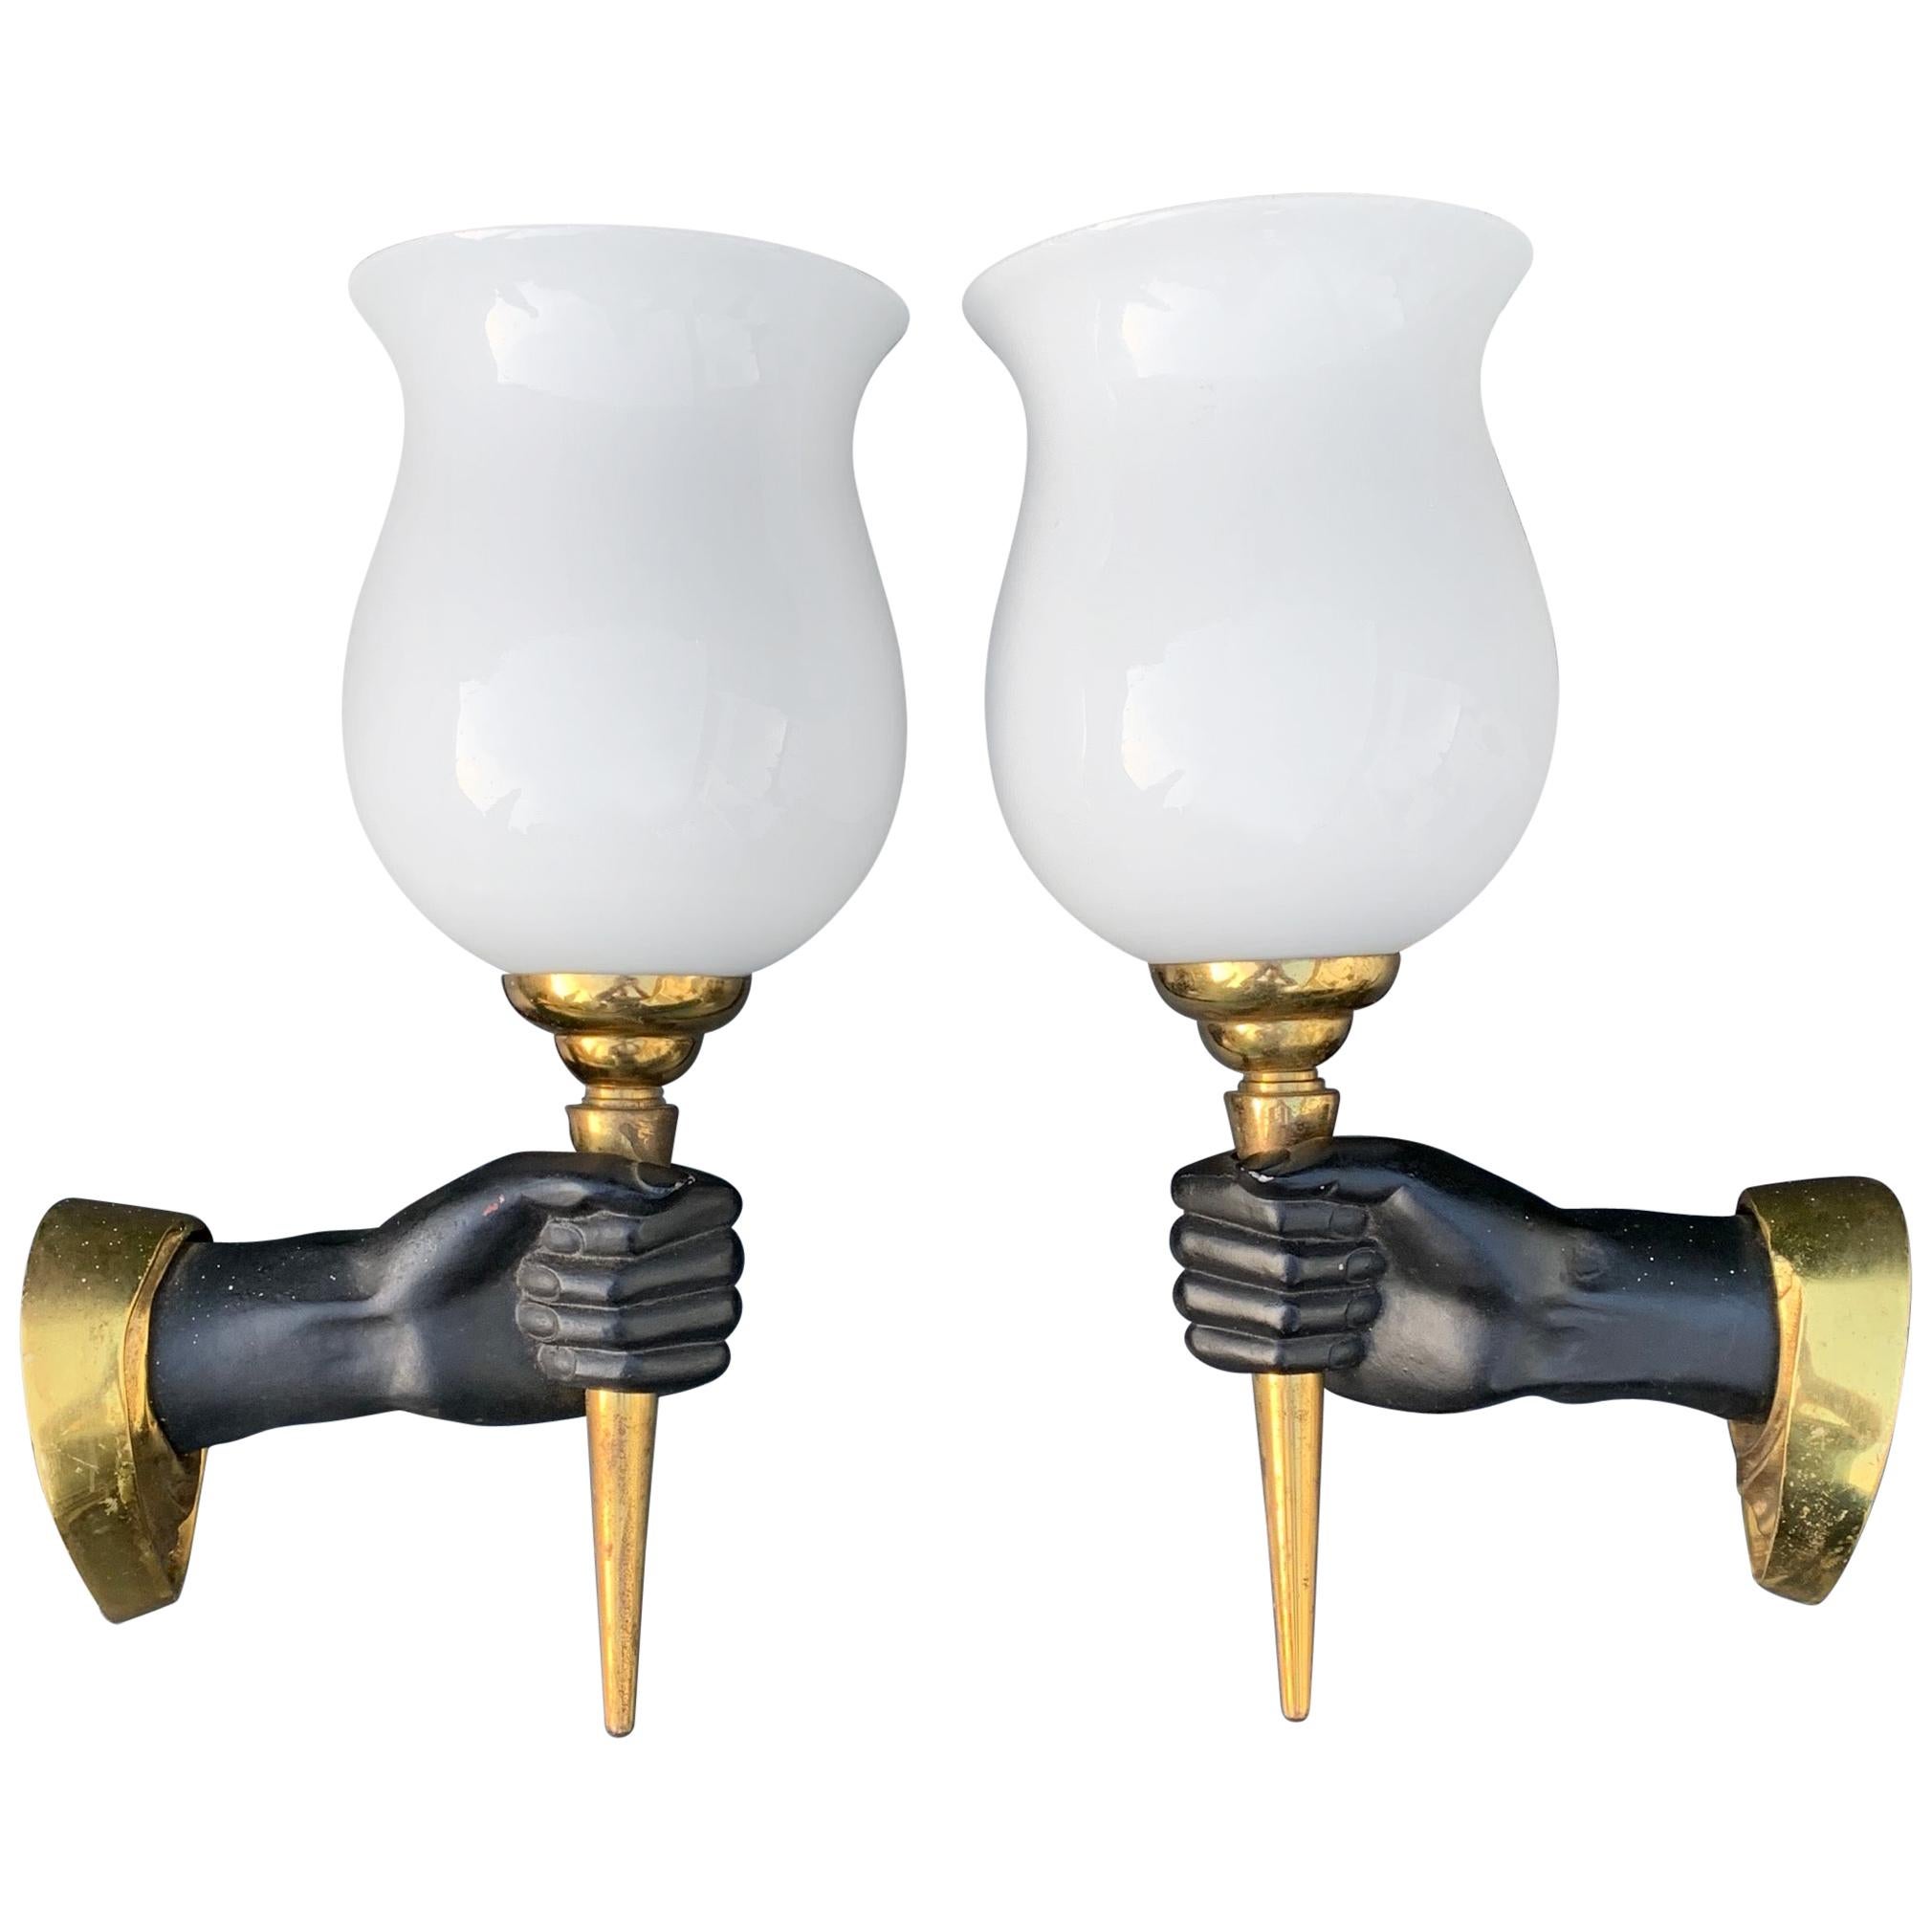 Striking Pair of Maison Baguès Style Opposite Hand Sconces w Opaline Glass Shade